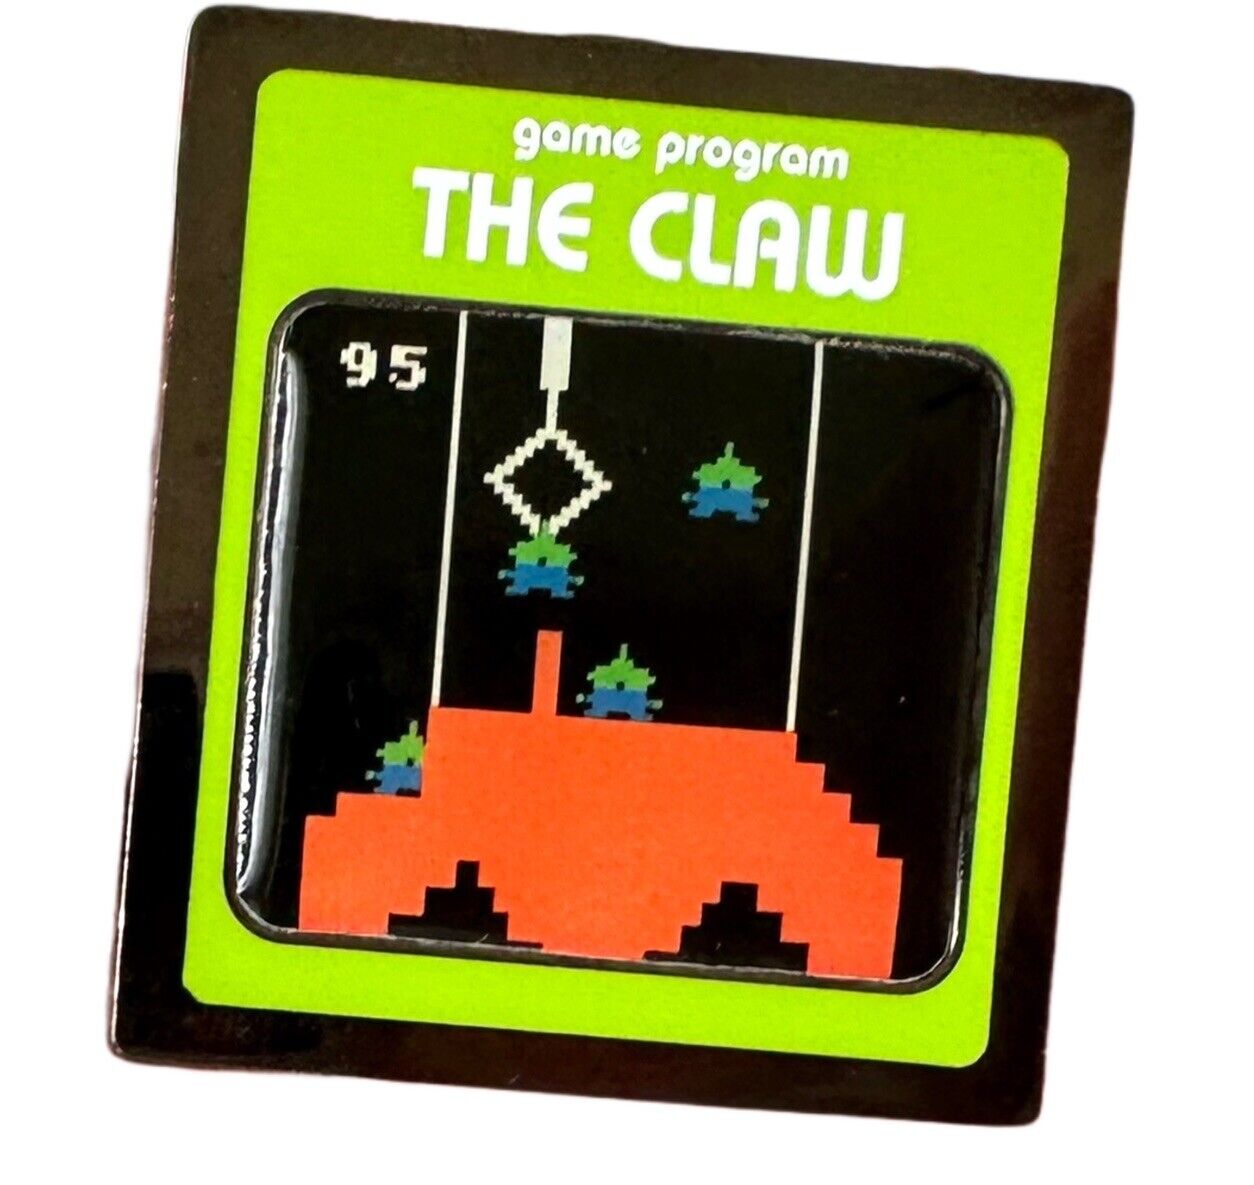 DLR Sci-Fi Academy Penny Arcade Video Games The Claw  LE 550 Disney Pin 